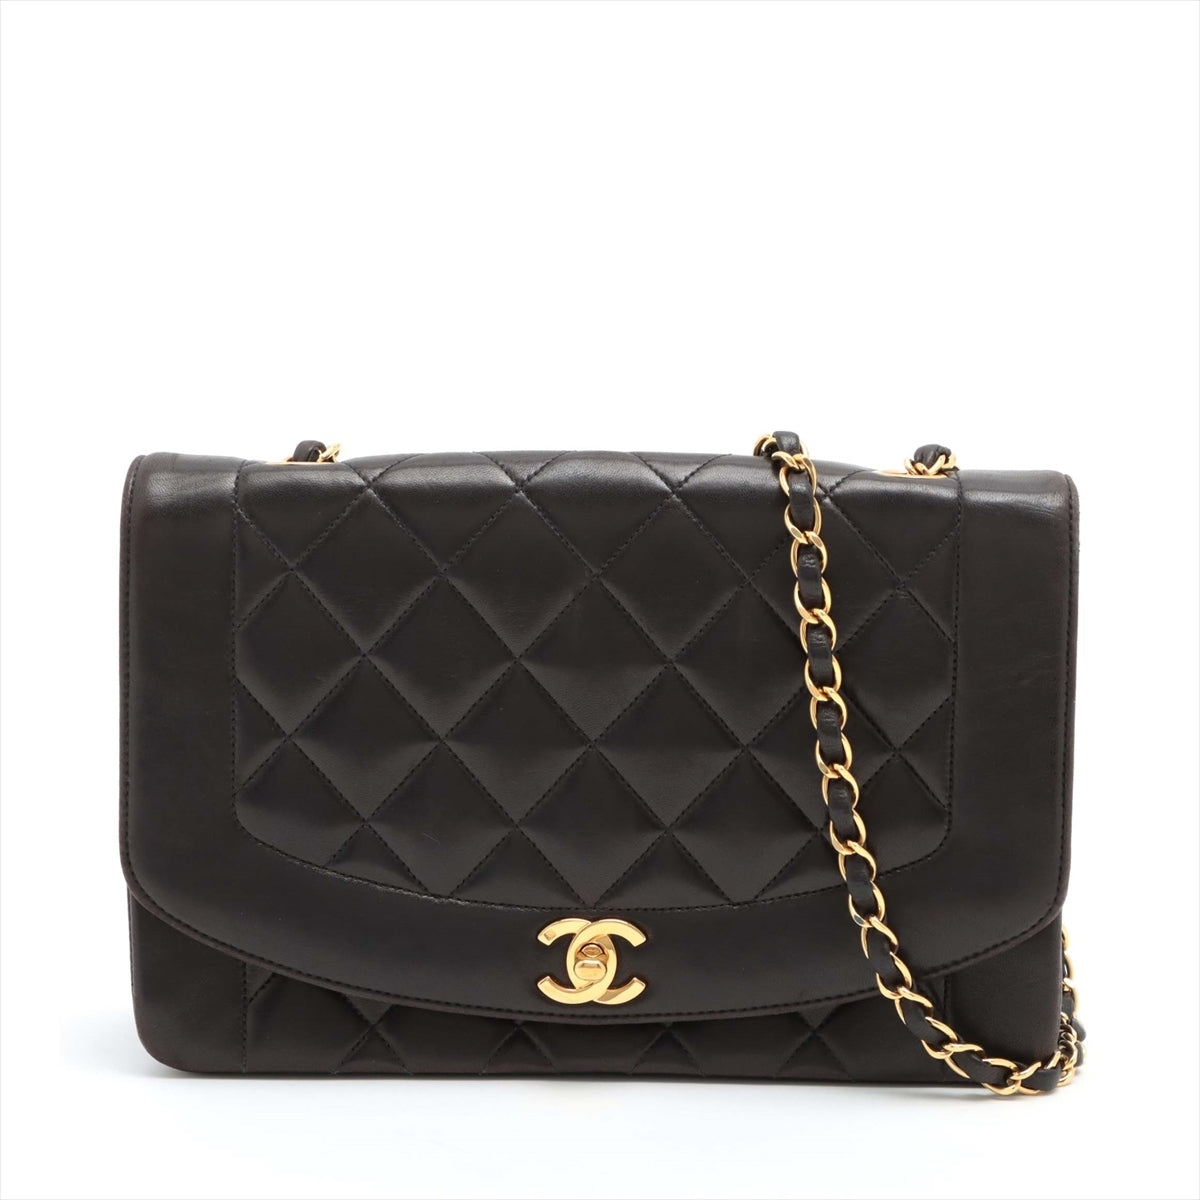 Chanel Matelasse Lambskin Single flap single chain bag Diana Flap Black Gold Metal fittings 3XXXXXX There is a turn lock noise